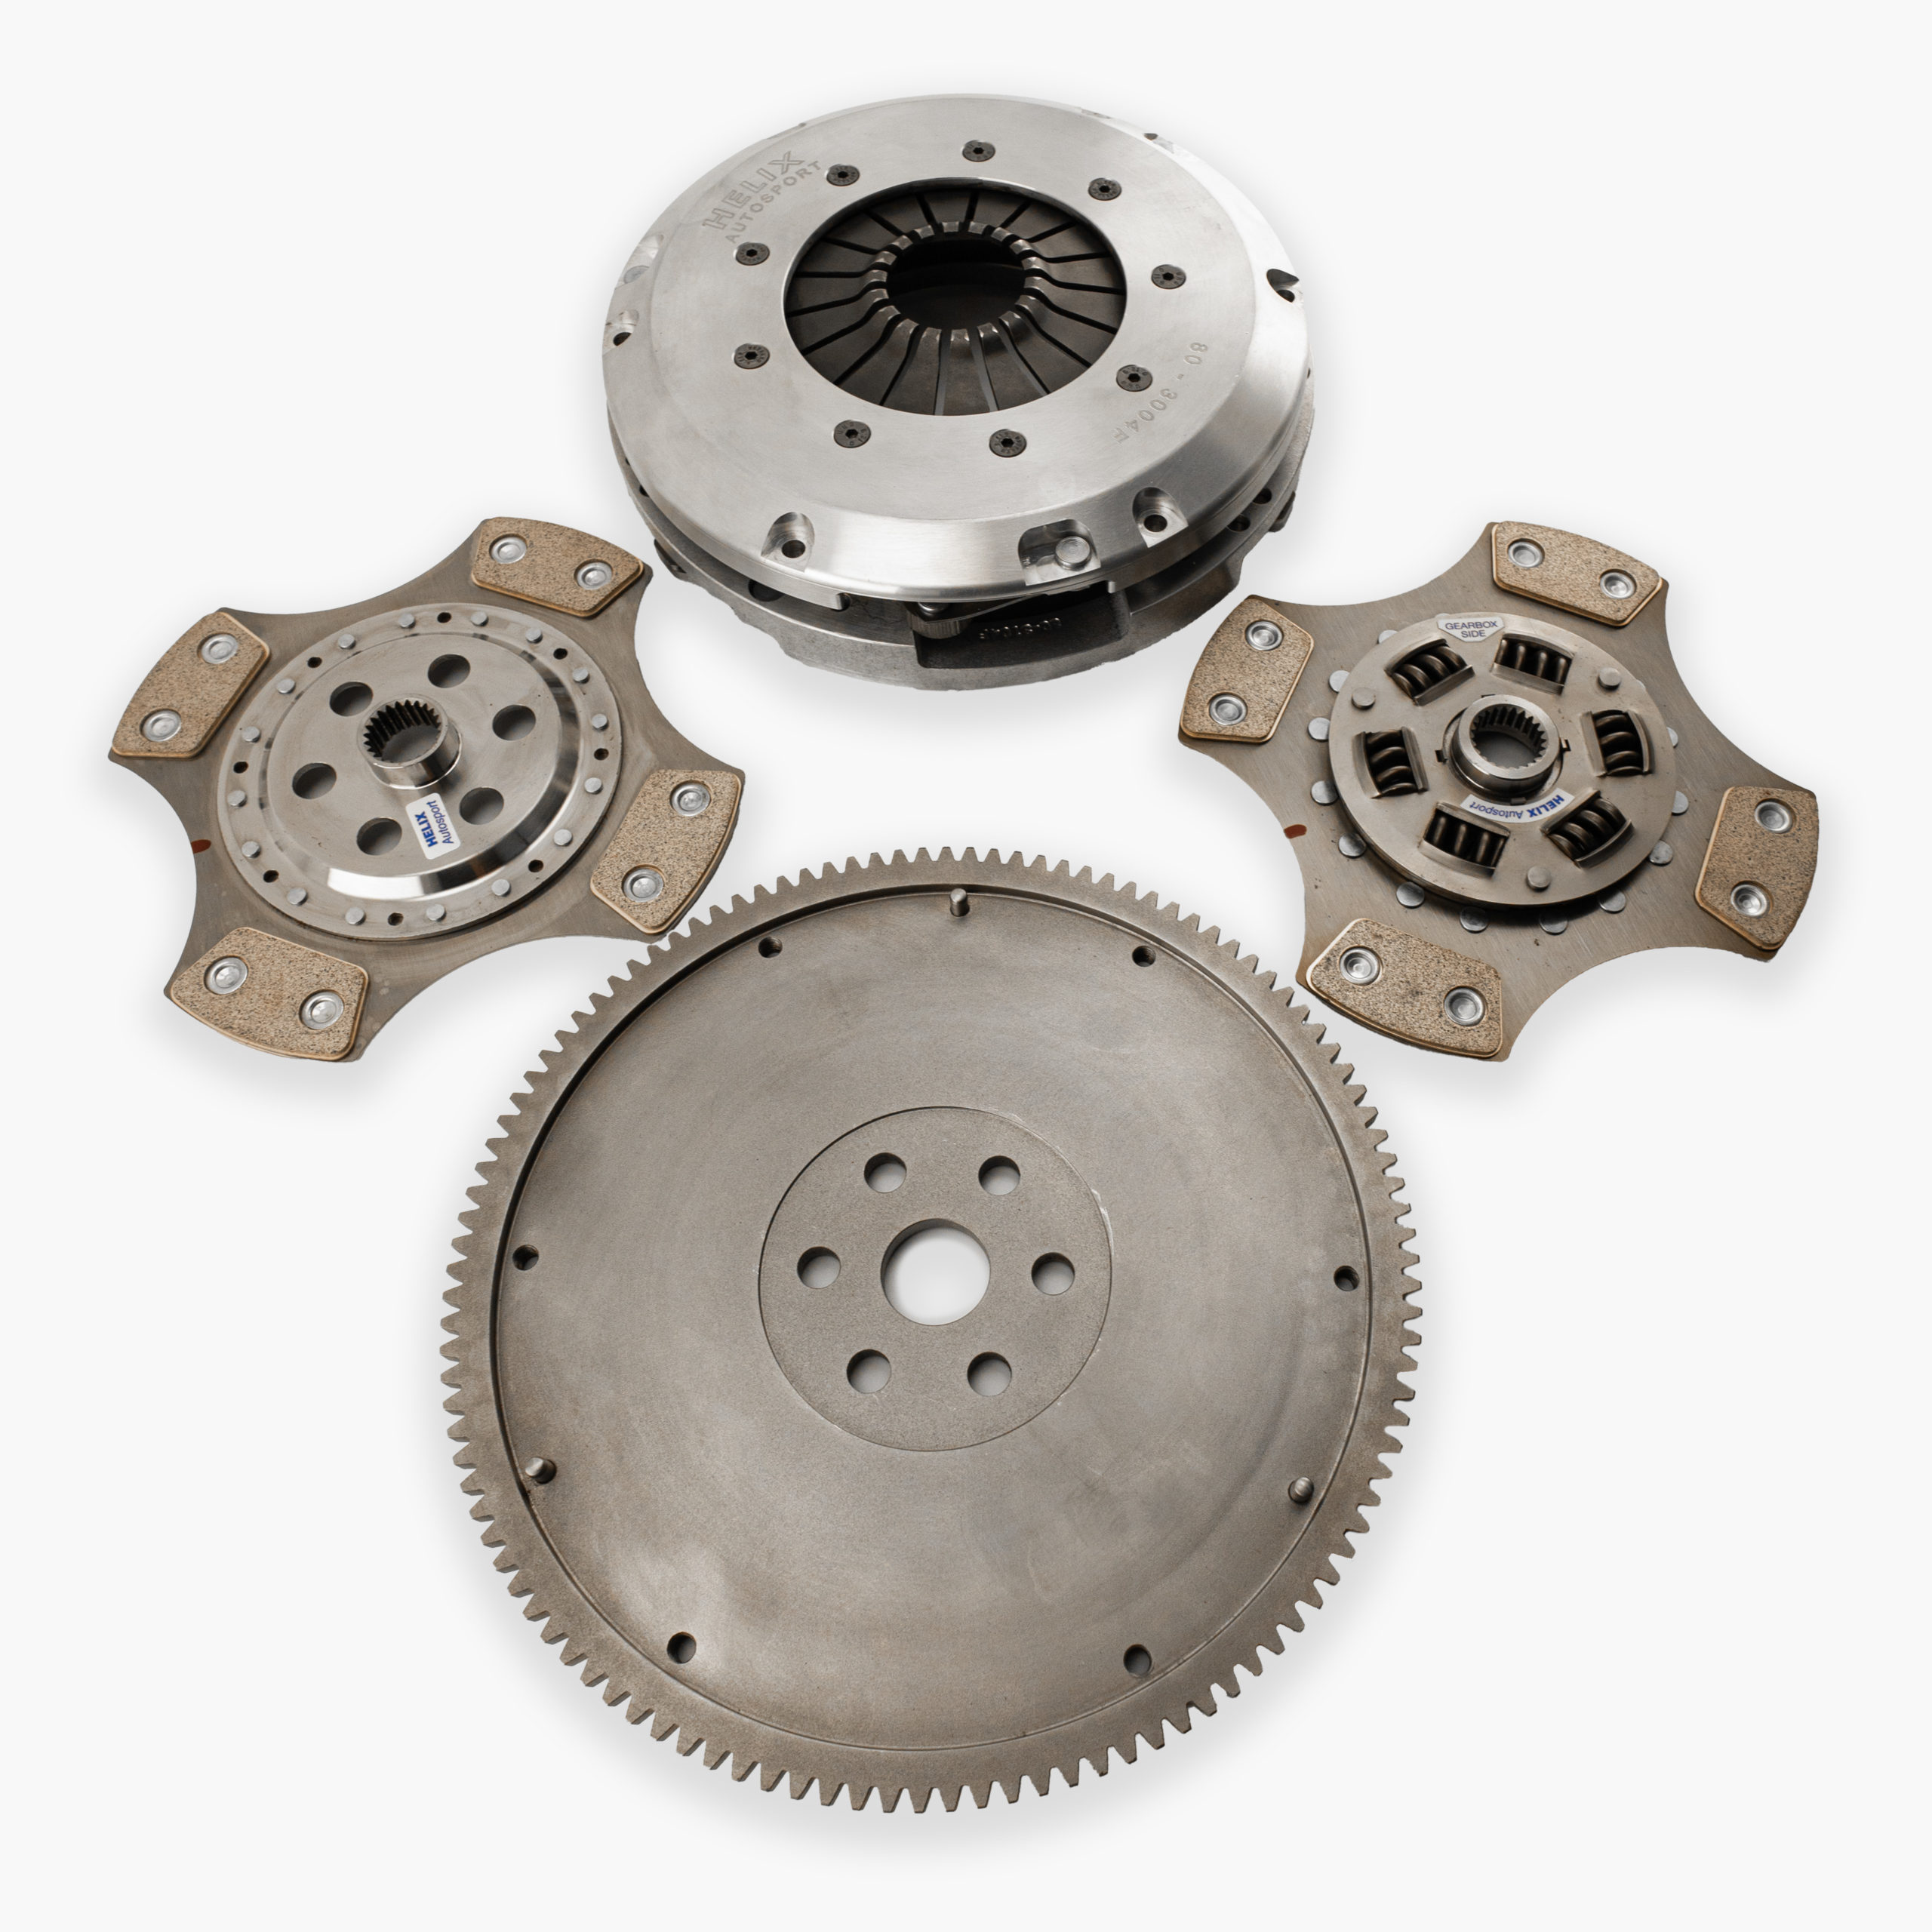 The image shows a stripped twin-plate clutch kit with flywheel on a white background